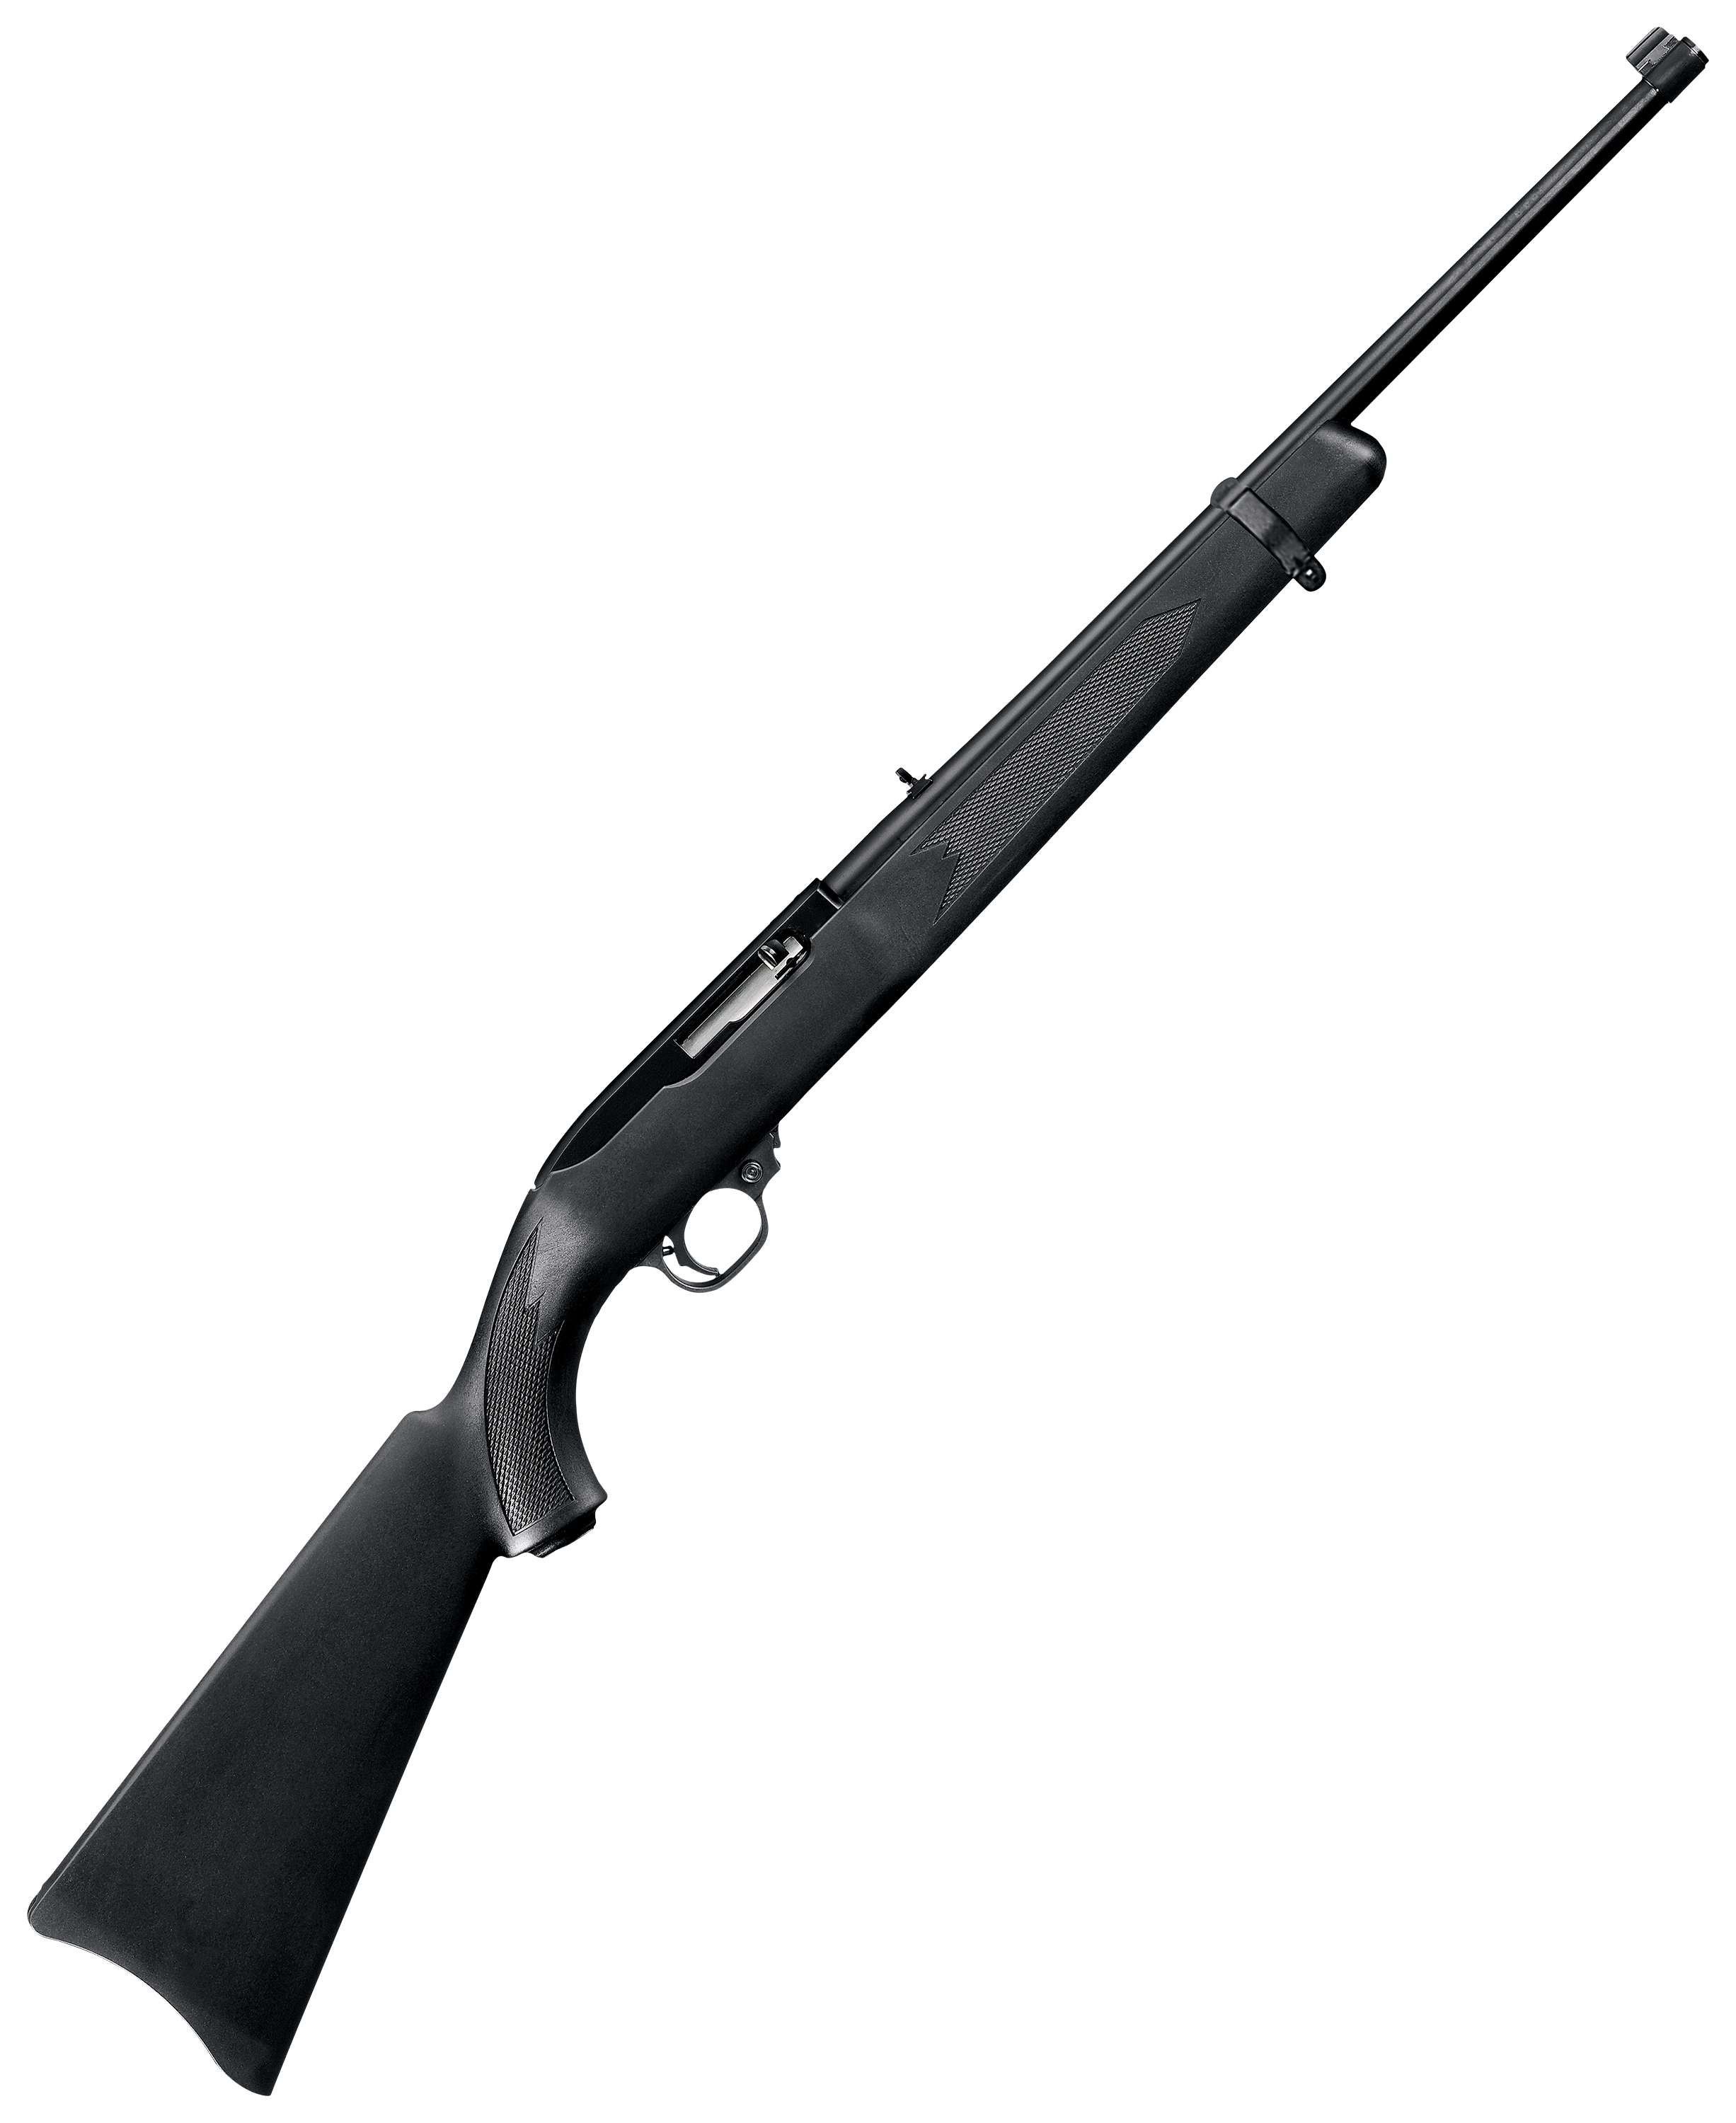 Ruger 10/22 Carbine Semi-Auto Rimfire Rifle with Synthetic Stock